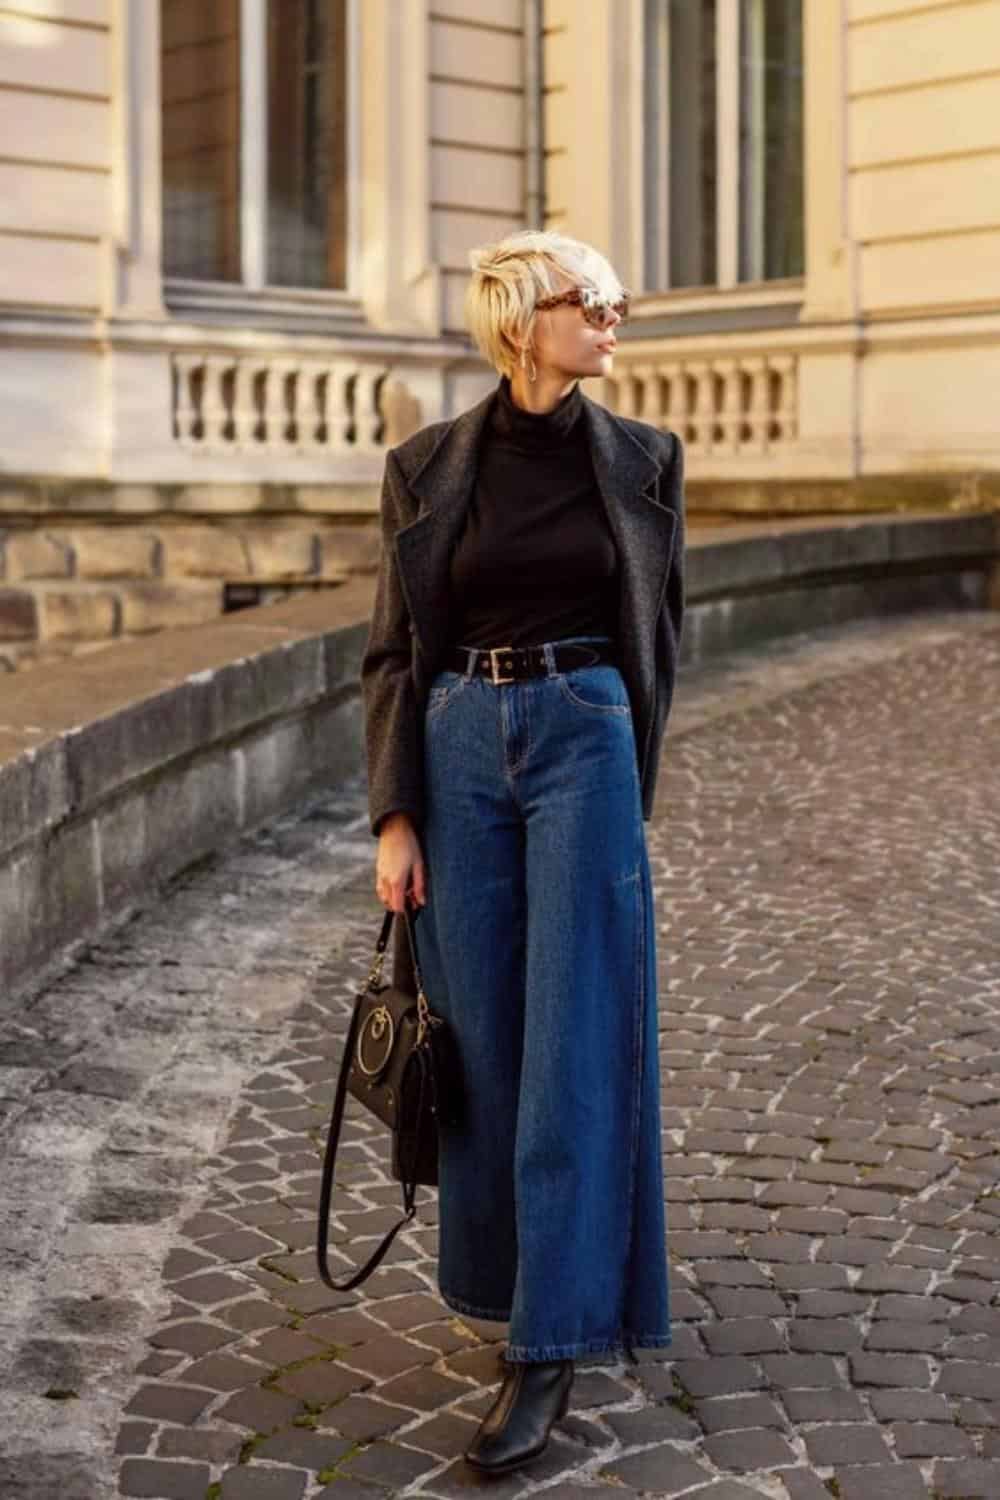 Blue wide leg jeans with black sweater and gray coat